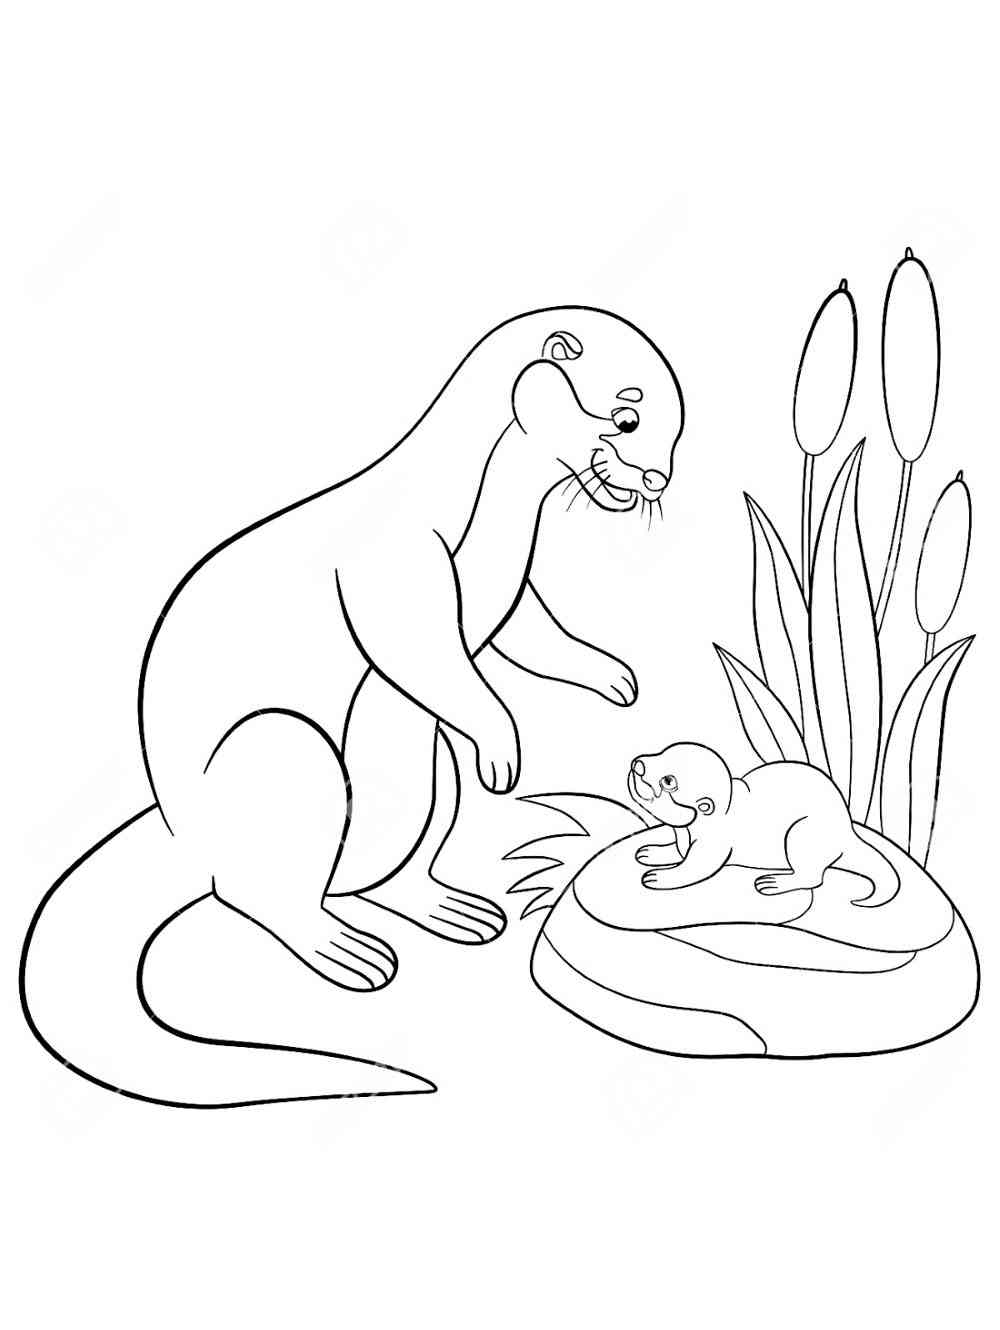 Otter and cub coloring page